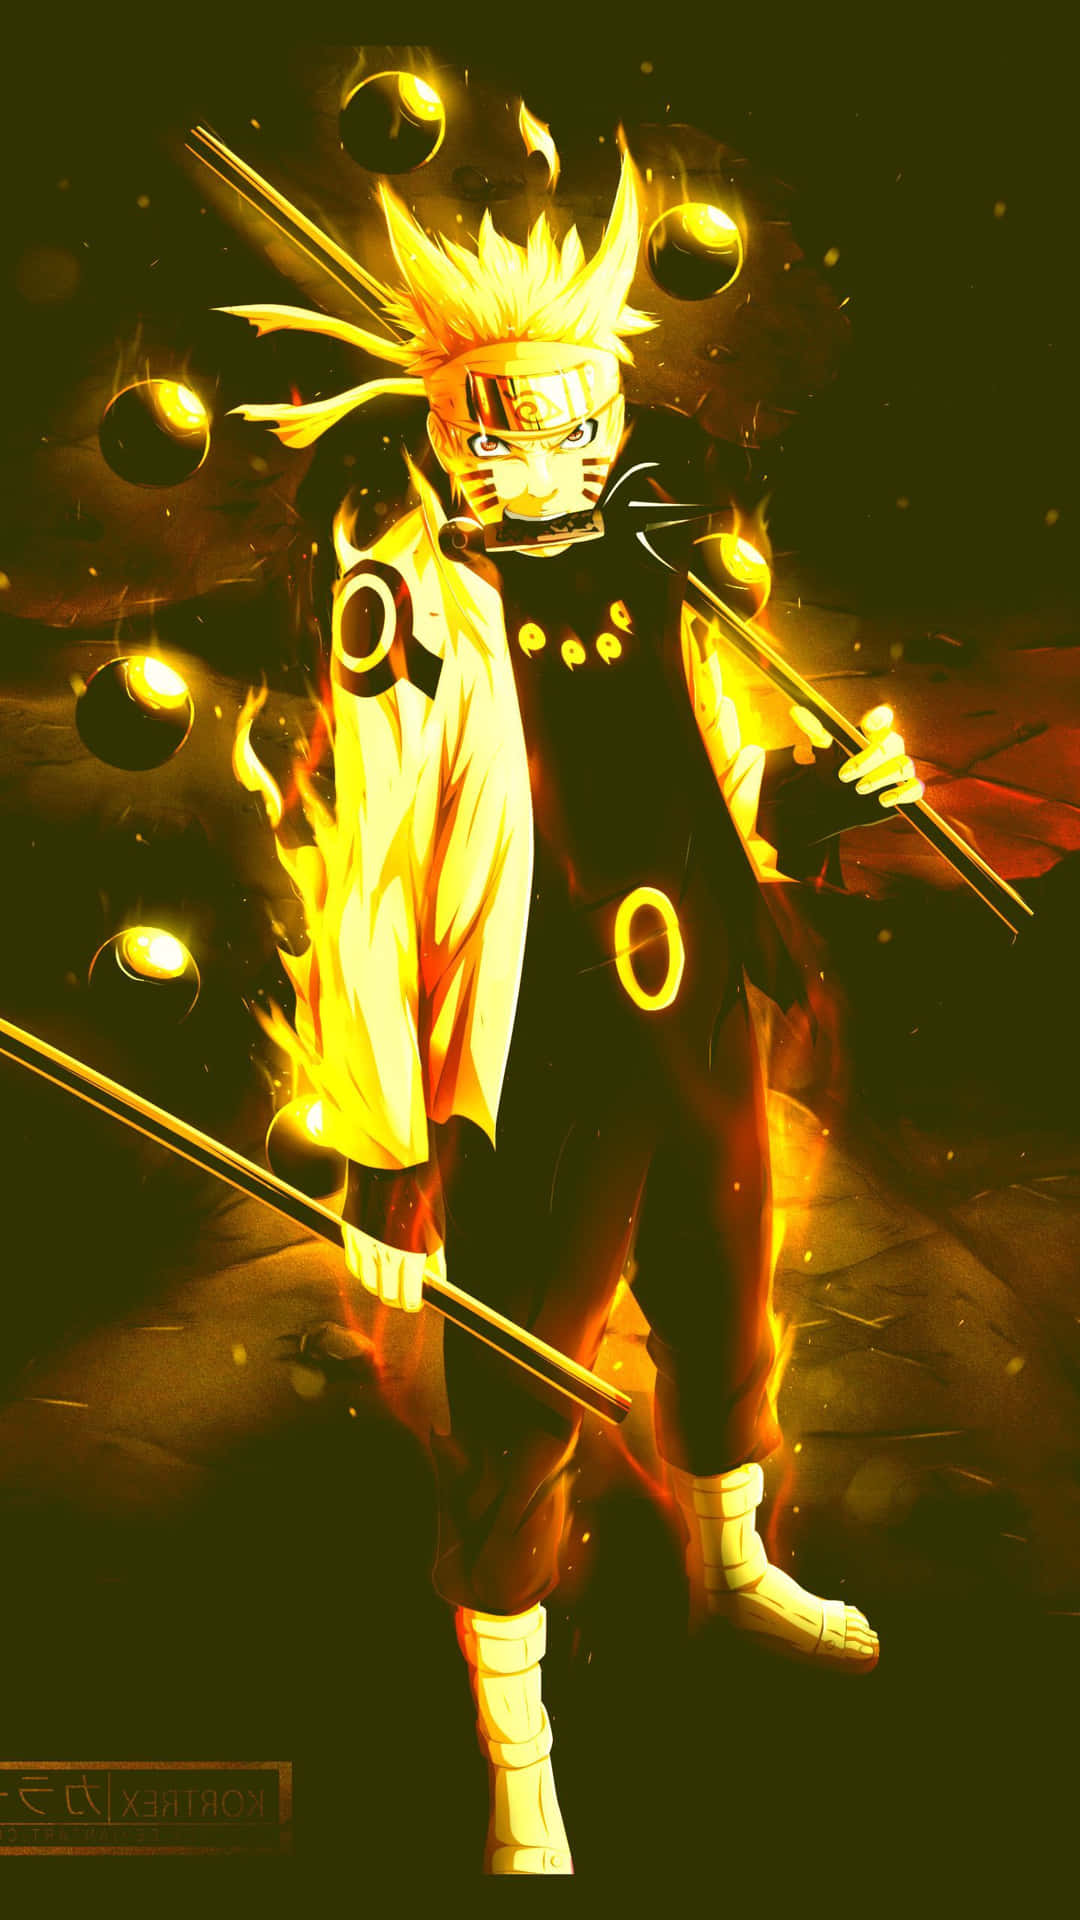 The Sage of the Six Paths, founder of the chakra and legendary god-like figure Wallpaper